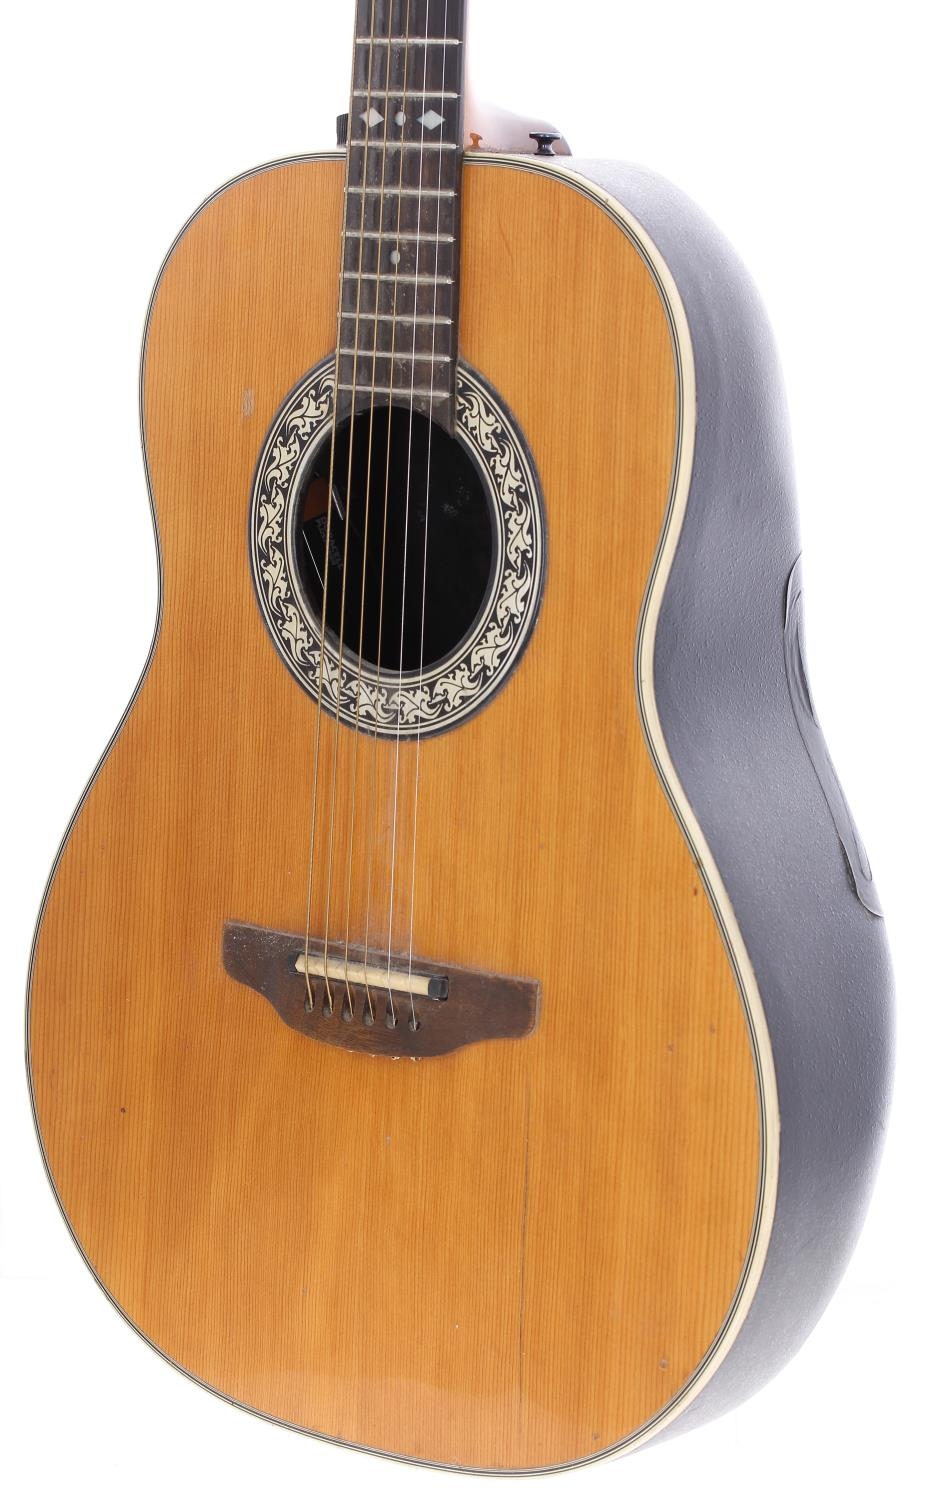 Cat Stevens - owned and stage played 1975 Ovation Folklore electro-acoustic guitar, made in USA, - Image 6 of 11